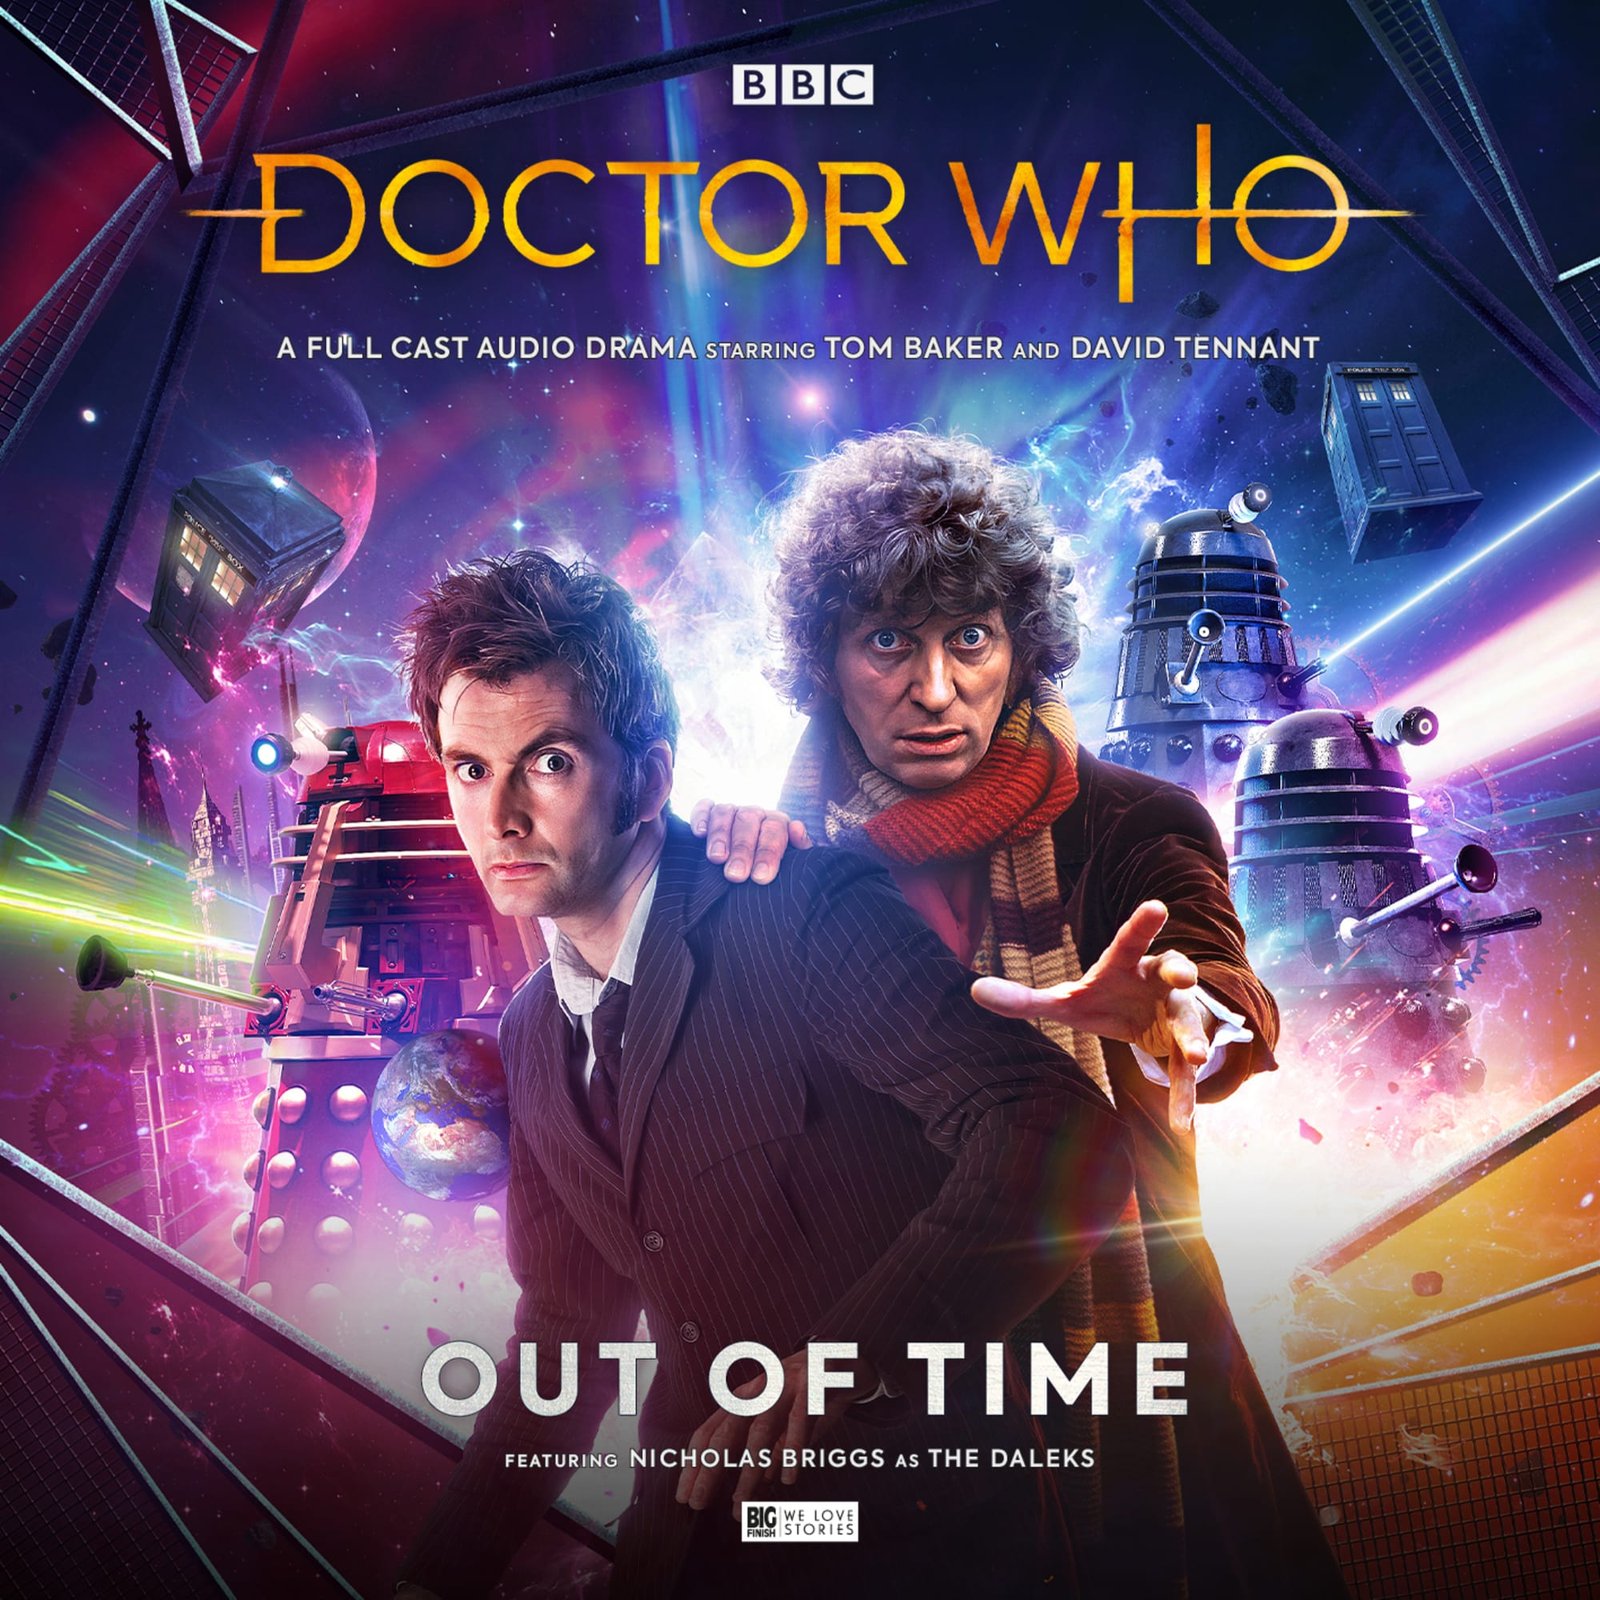 Tom Baker’s Fourth Doctor Returns with David Tennant’s Tenth Doctor in This Big Finish Teaser